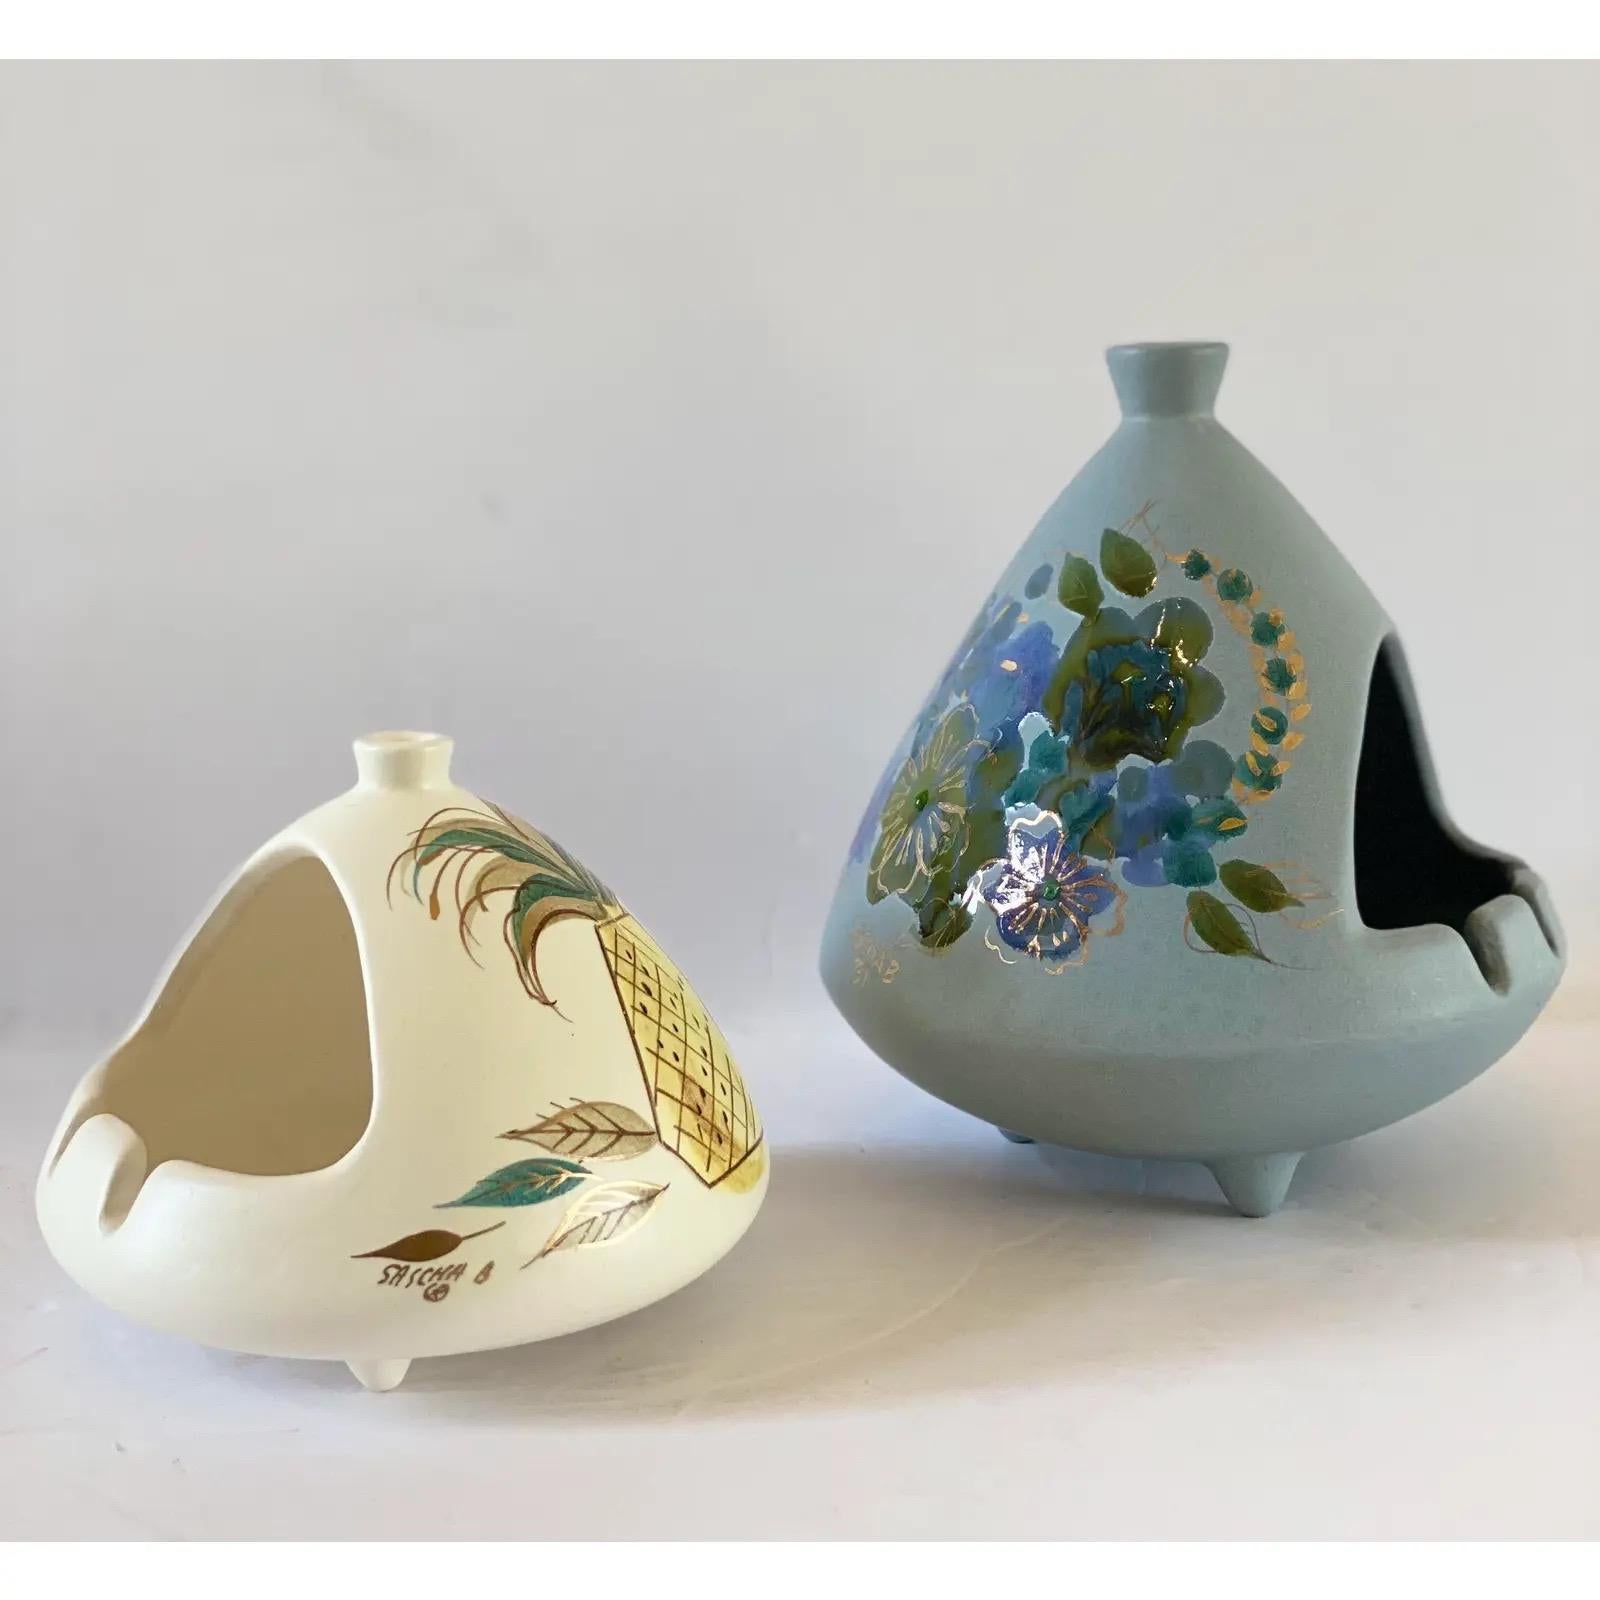 We are very pleased to offer a hand-painted, chic set of two chimney ashtrays by iconic mid-century designer Sascha Brastoff, circa the 1950s. Both pieces are signed. In excellent vintage condition. Please see all attached pictures.
Small ashtray: